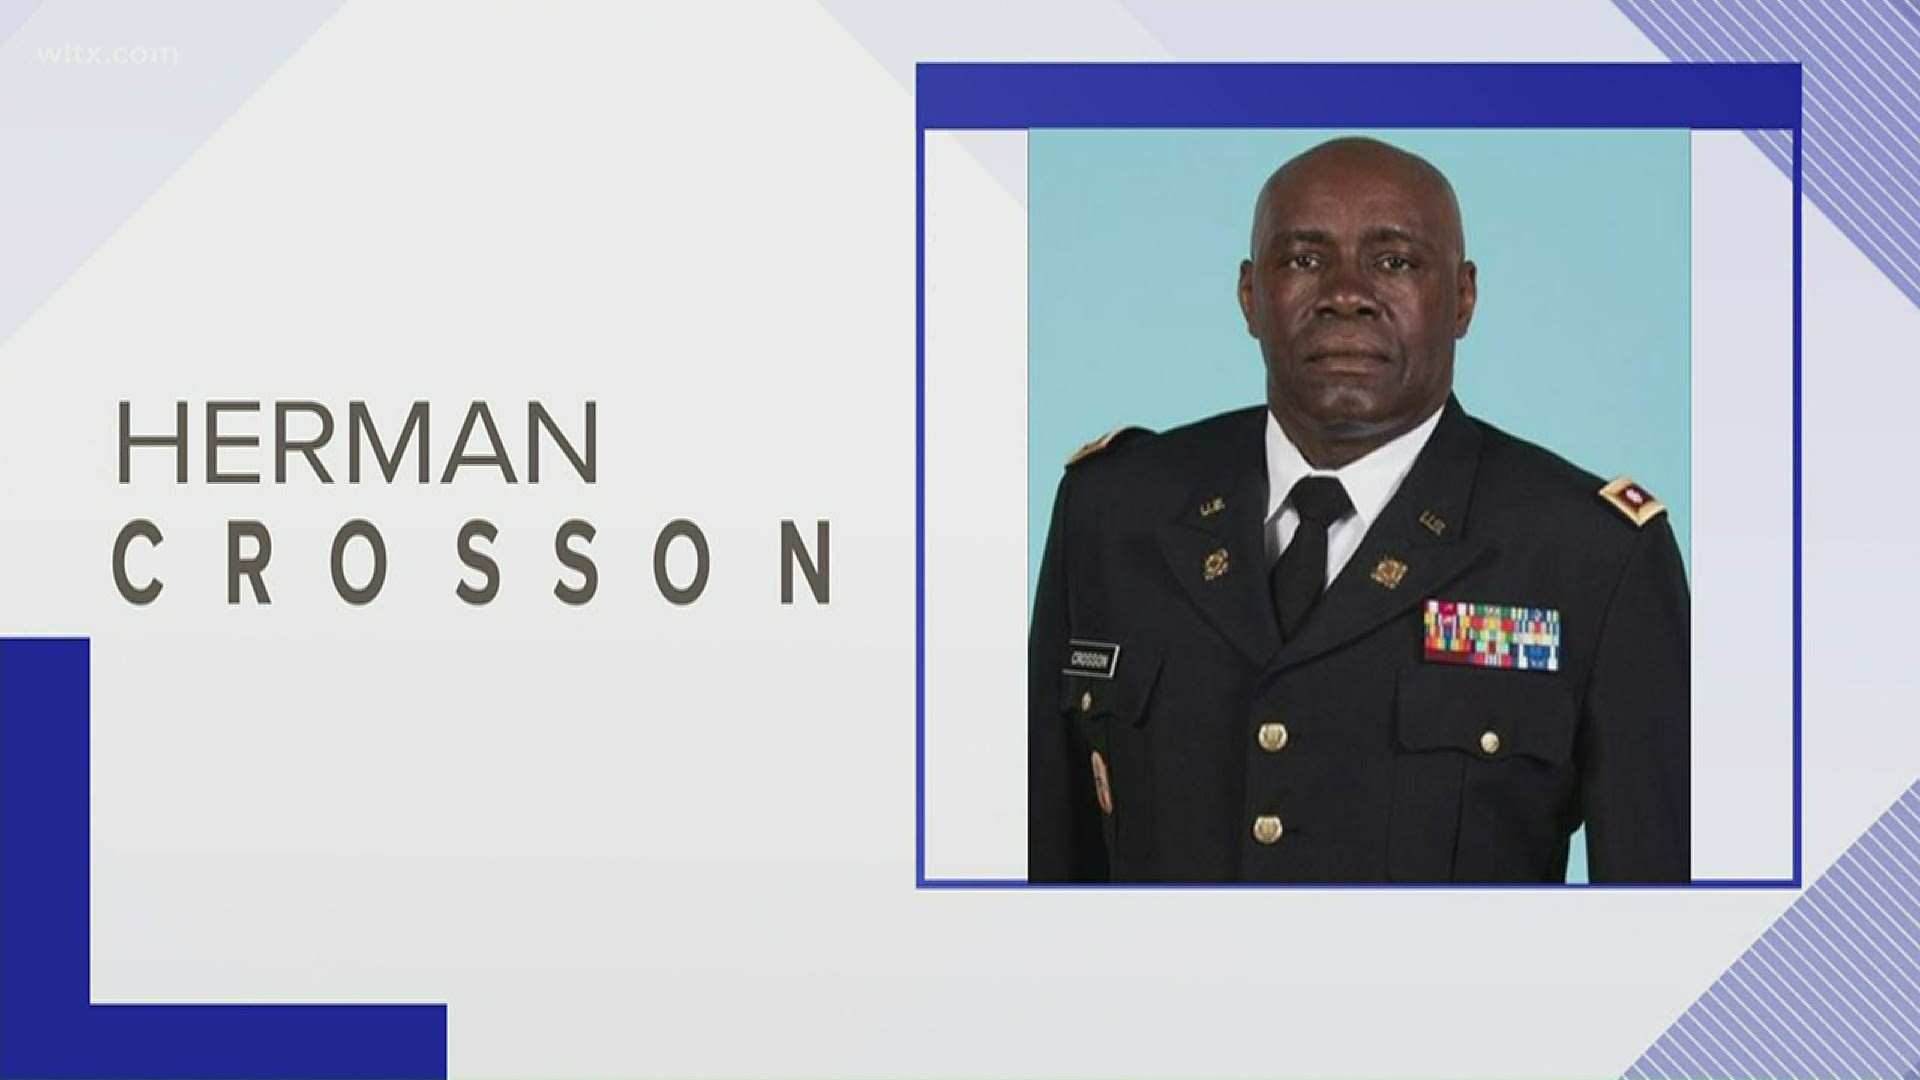 U.S. Army Lt. Col. Herman Crosson will begin his position as the first African American brigade commander of the 59th Troop Command on June 1.